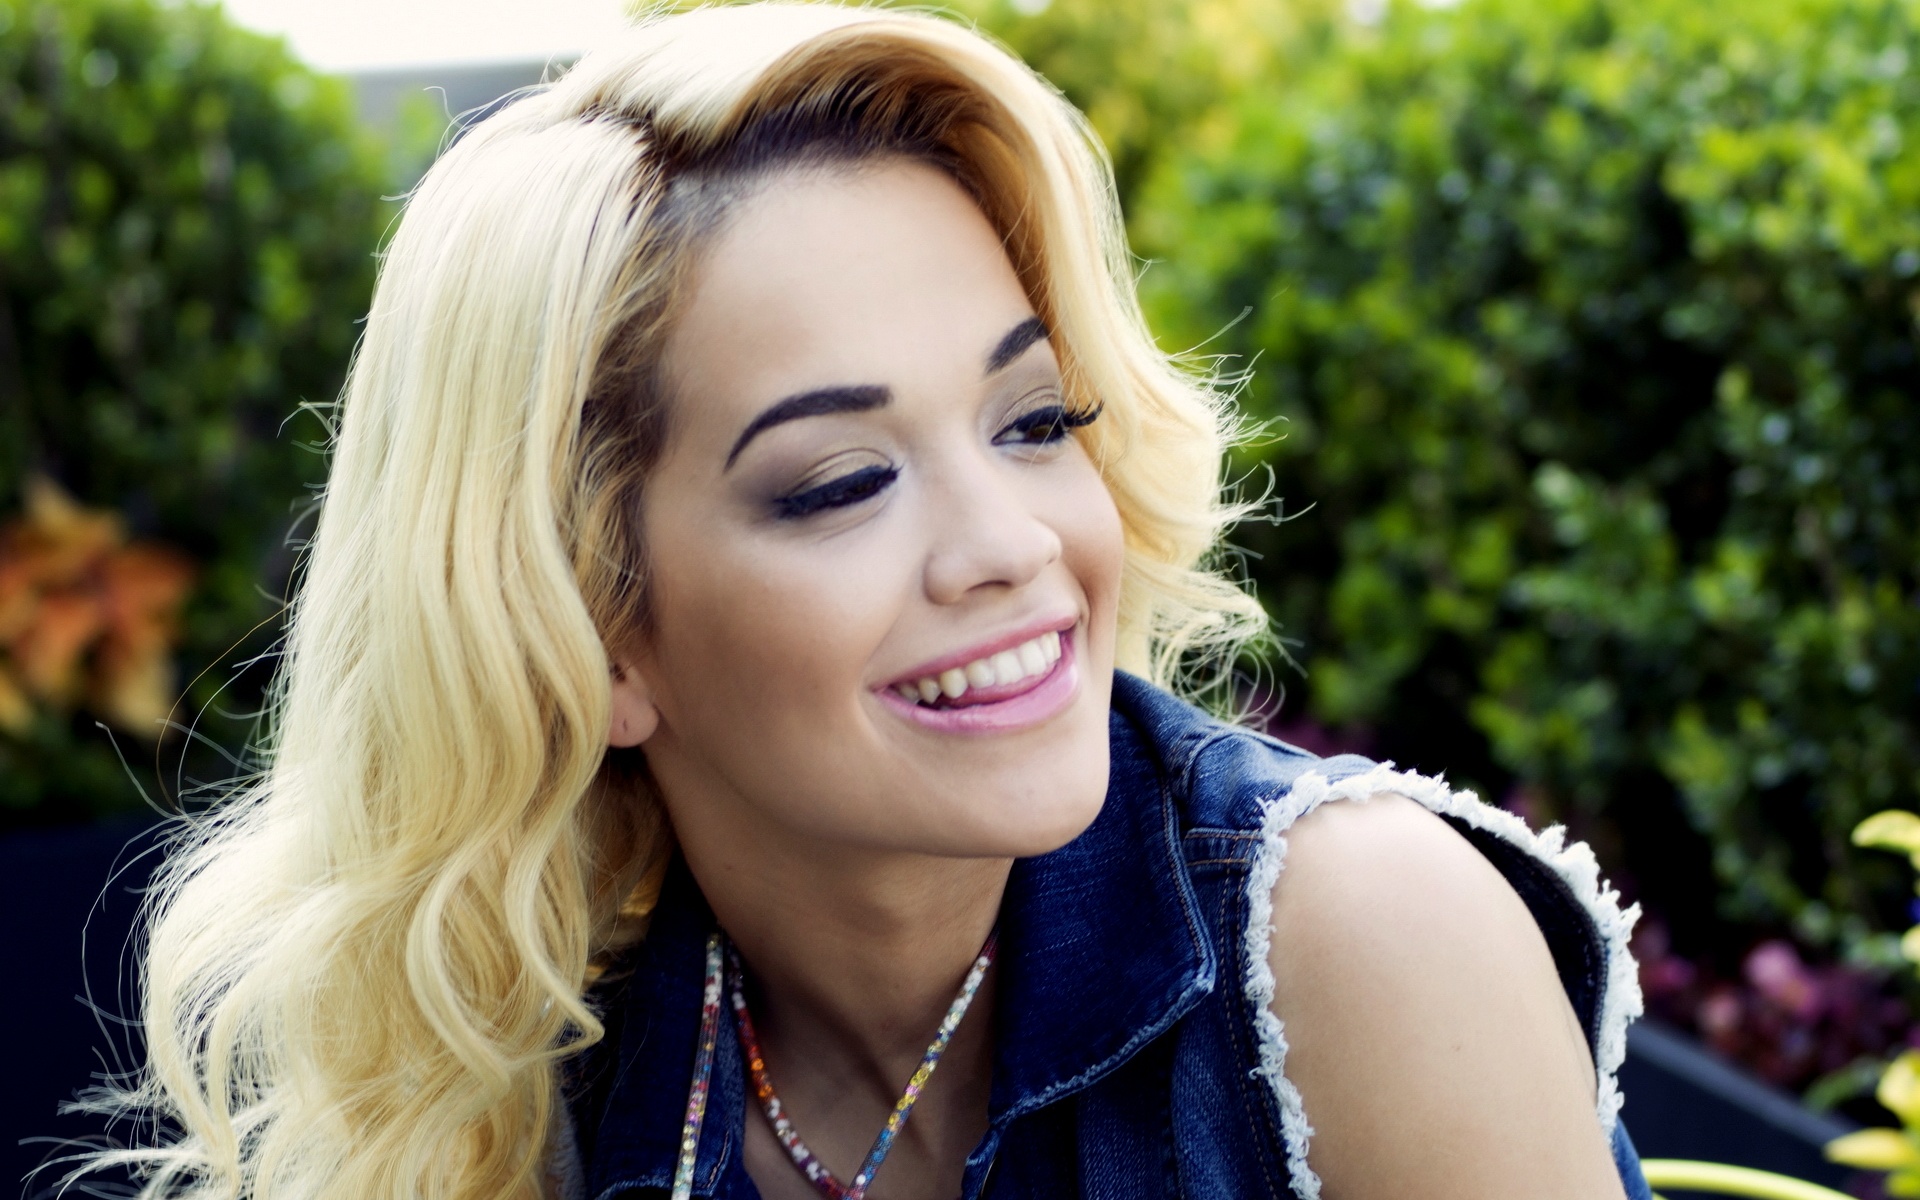 Rita Ora Ethnicity, Race, Parents and Nationality